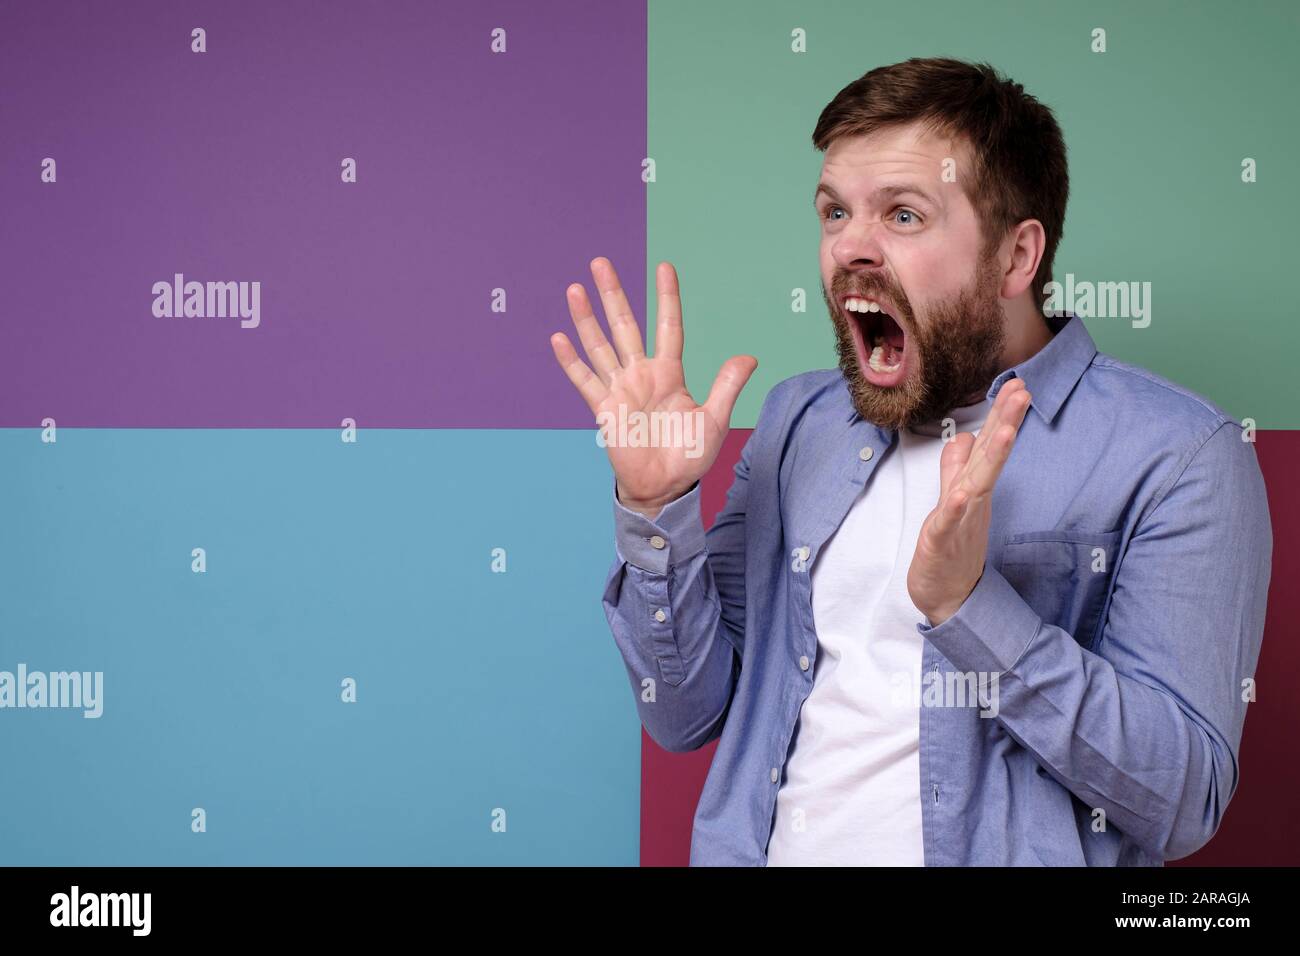 Furious, angry bearded man annoyed, he makes a gesture with hands and shouts loudly, with copy space. Stock Photo